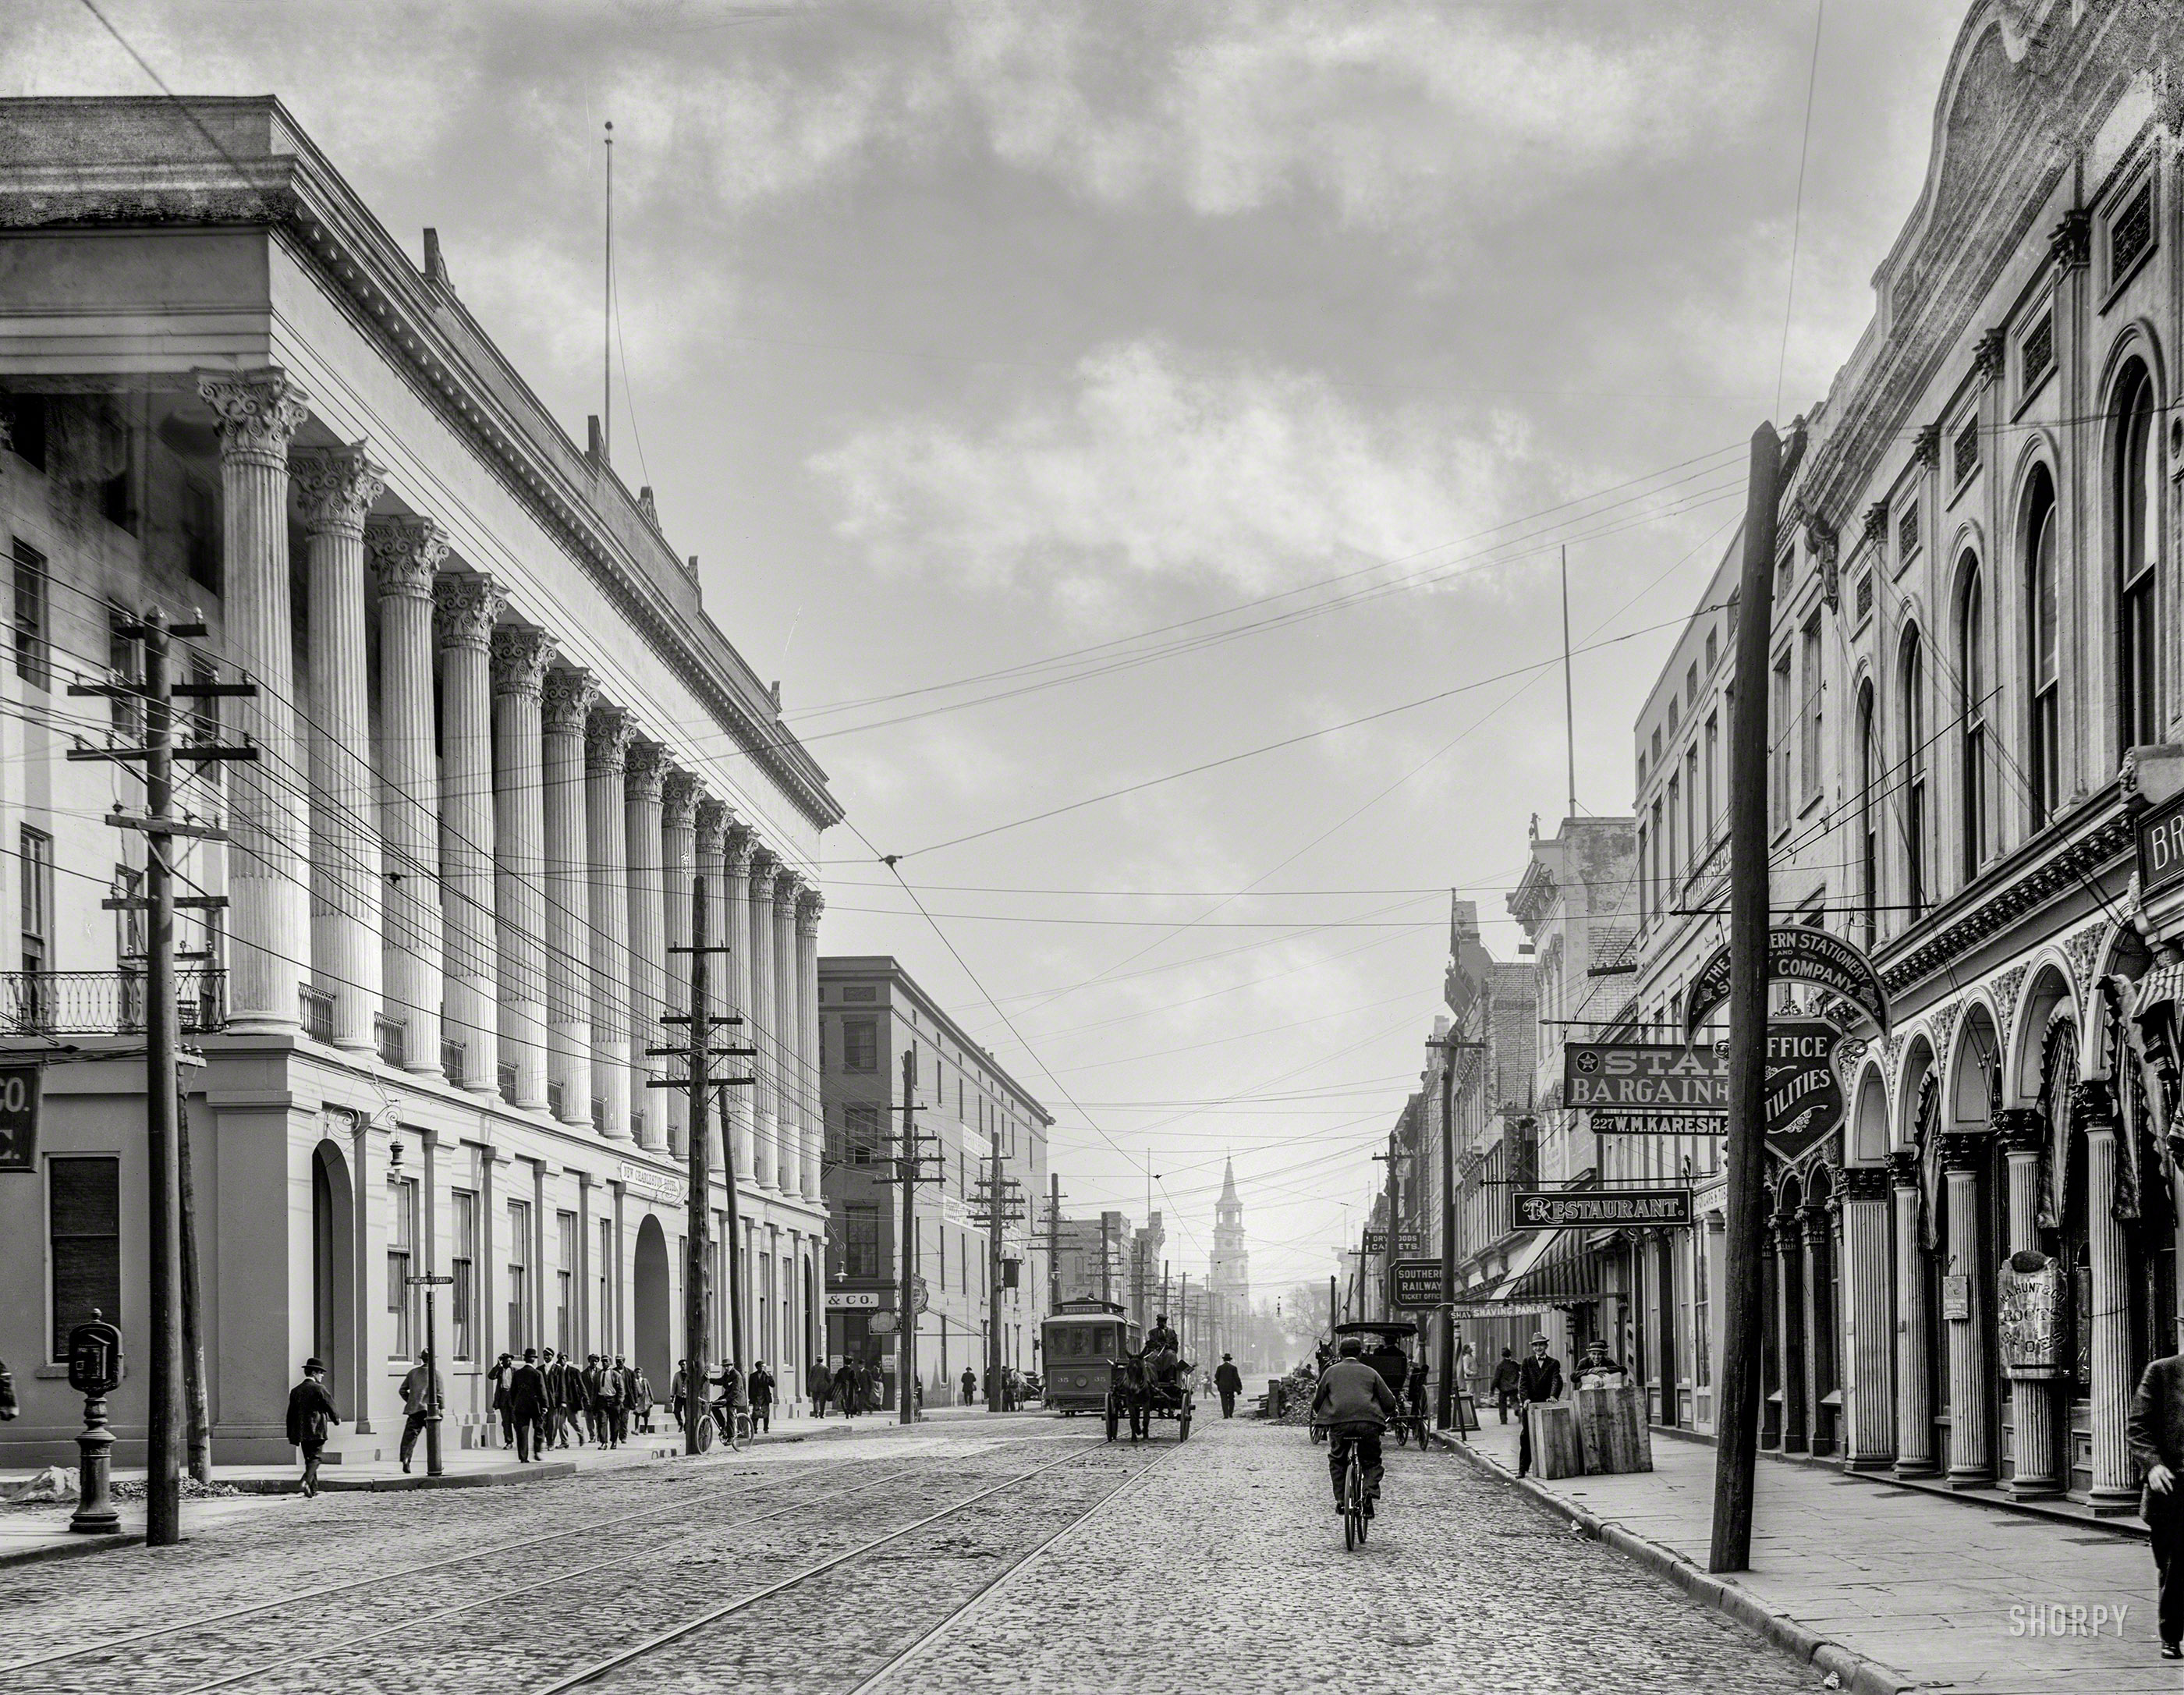 Charleston, South Carolina, circa 1910. "New Charleston Hotel and Meeting Street." Close by: a bootery, office supplies and "Shaving Parlor." 8x10 inch dry plate glass negative, Detroit Publishing Company. View full size.